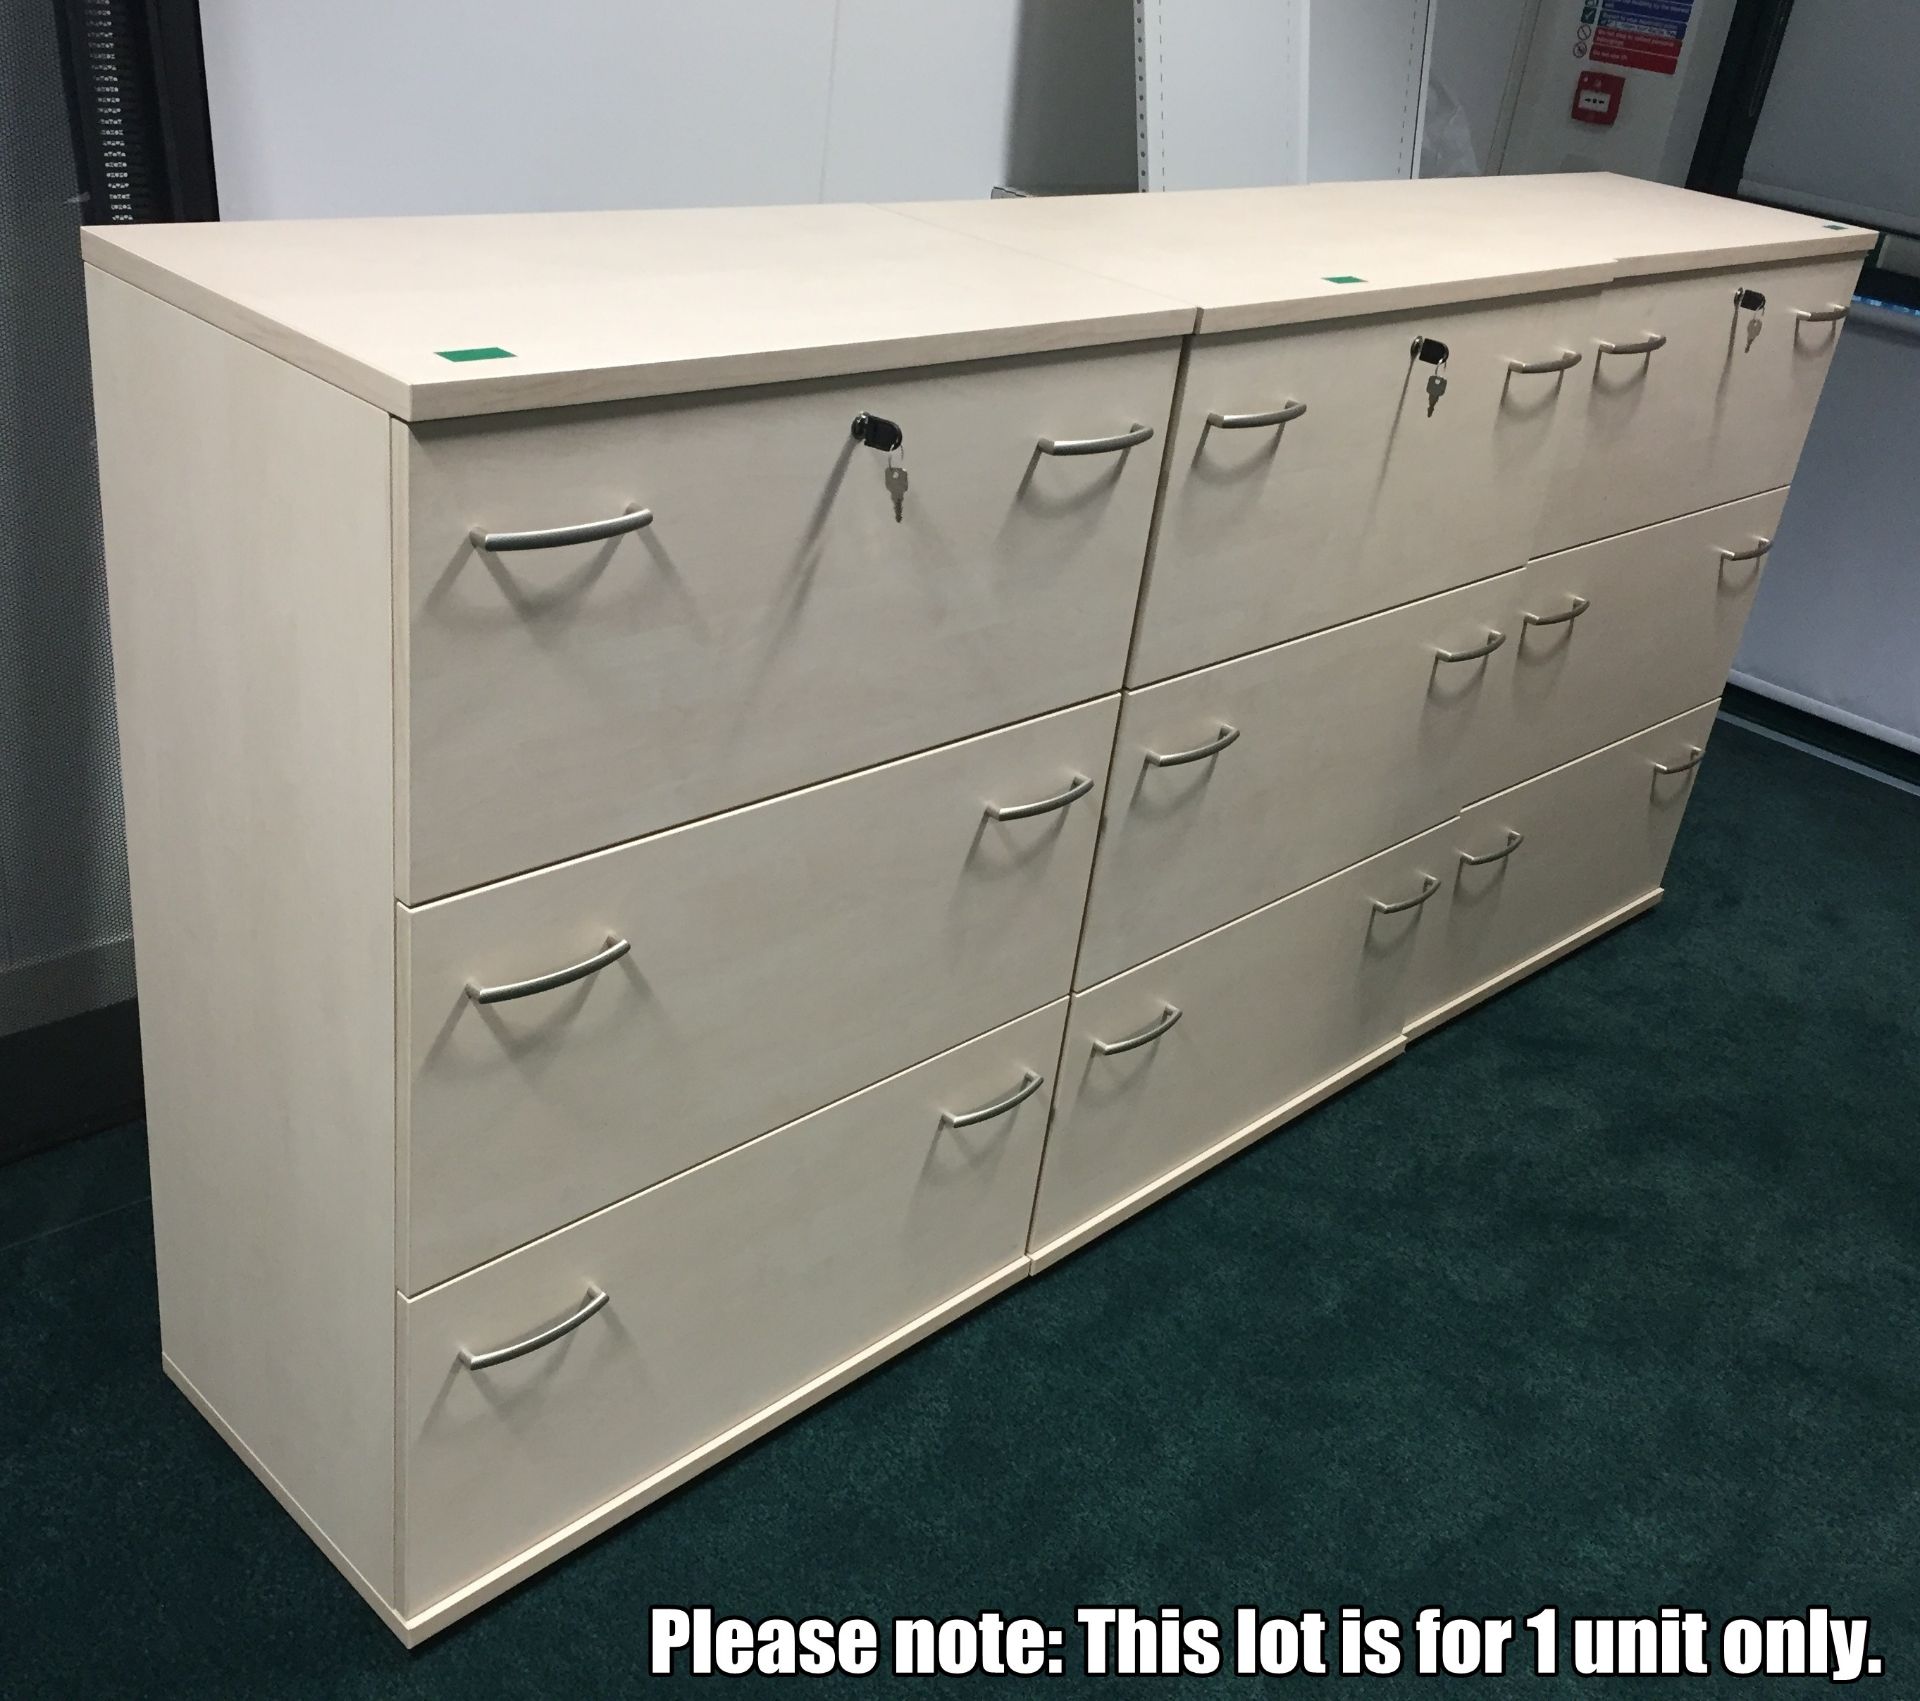 1 x Modern Three Drawer Office Filing Cabinet - Light Maple Finish - Includes Lock and Key - Premium - Image 3 of 7